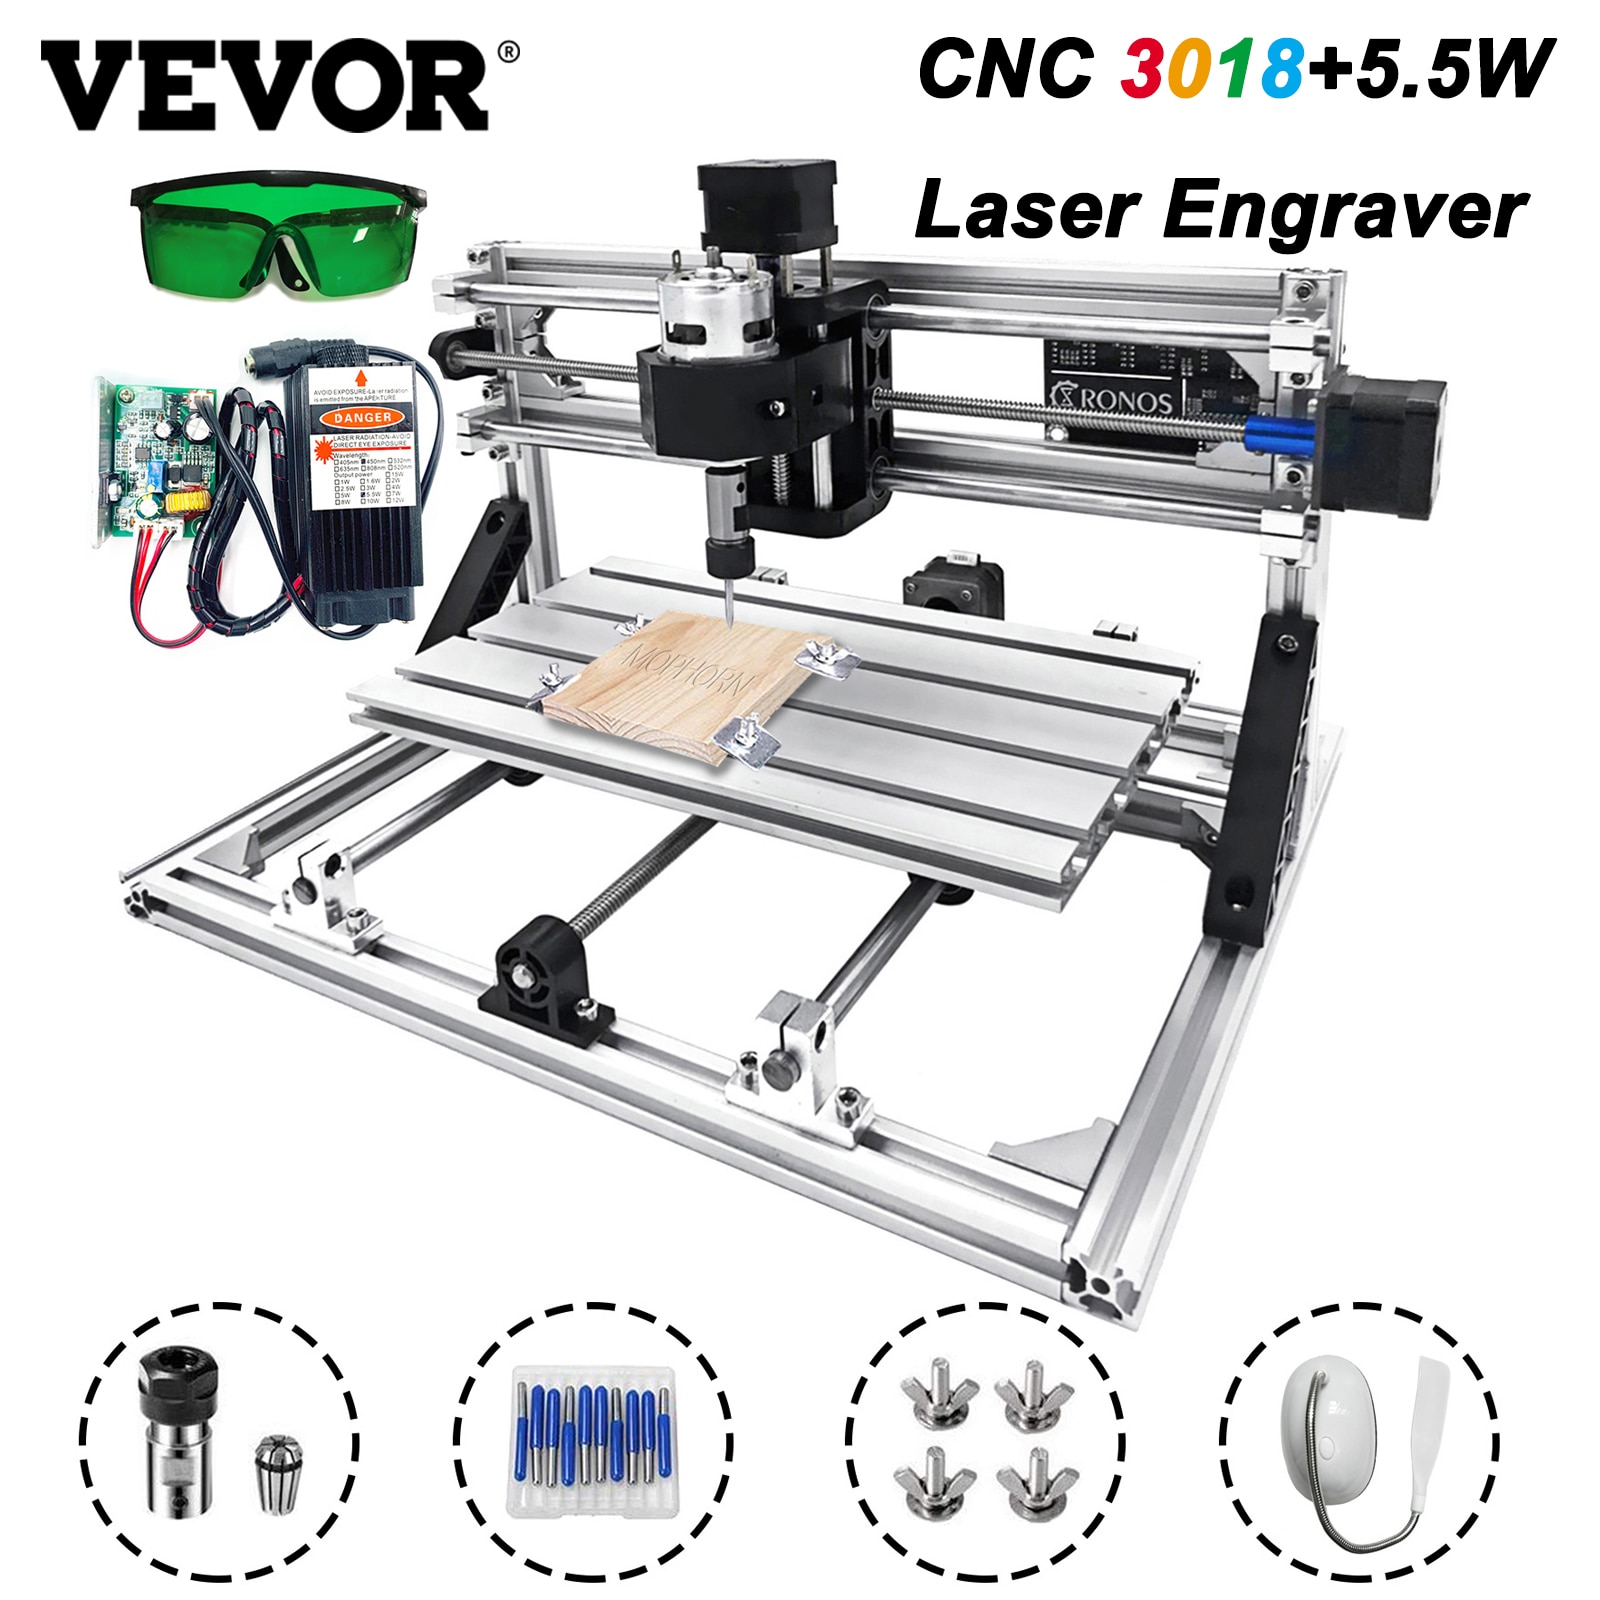 2021 Best CNC Laser Engraving & Cutting Machines for Sale - STYLECNC